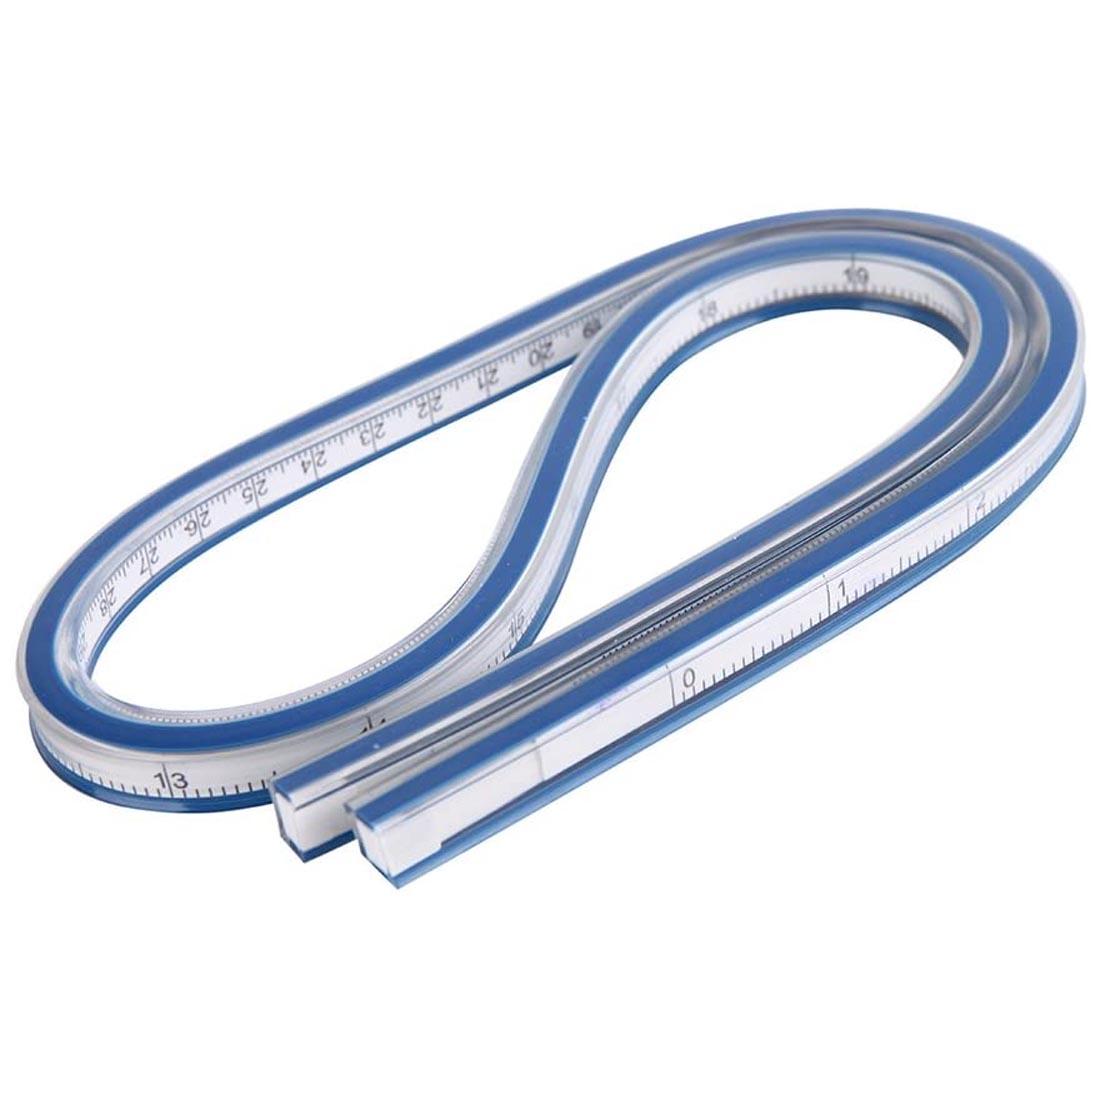 blue and white flexible curve ruler